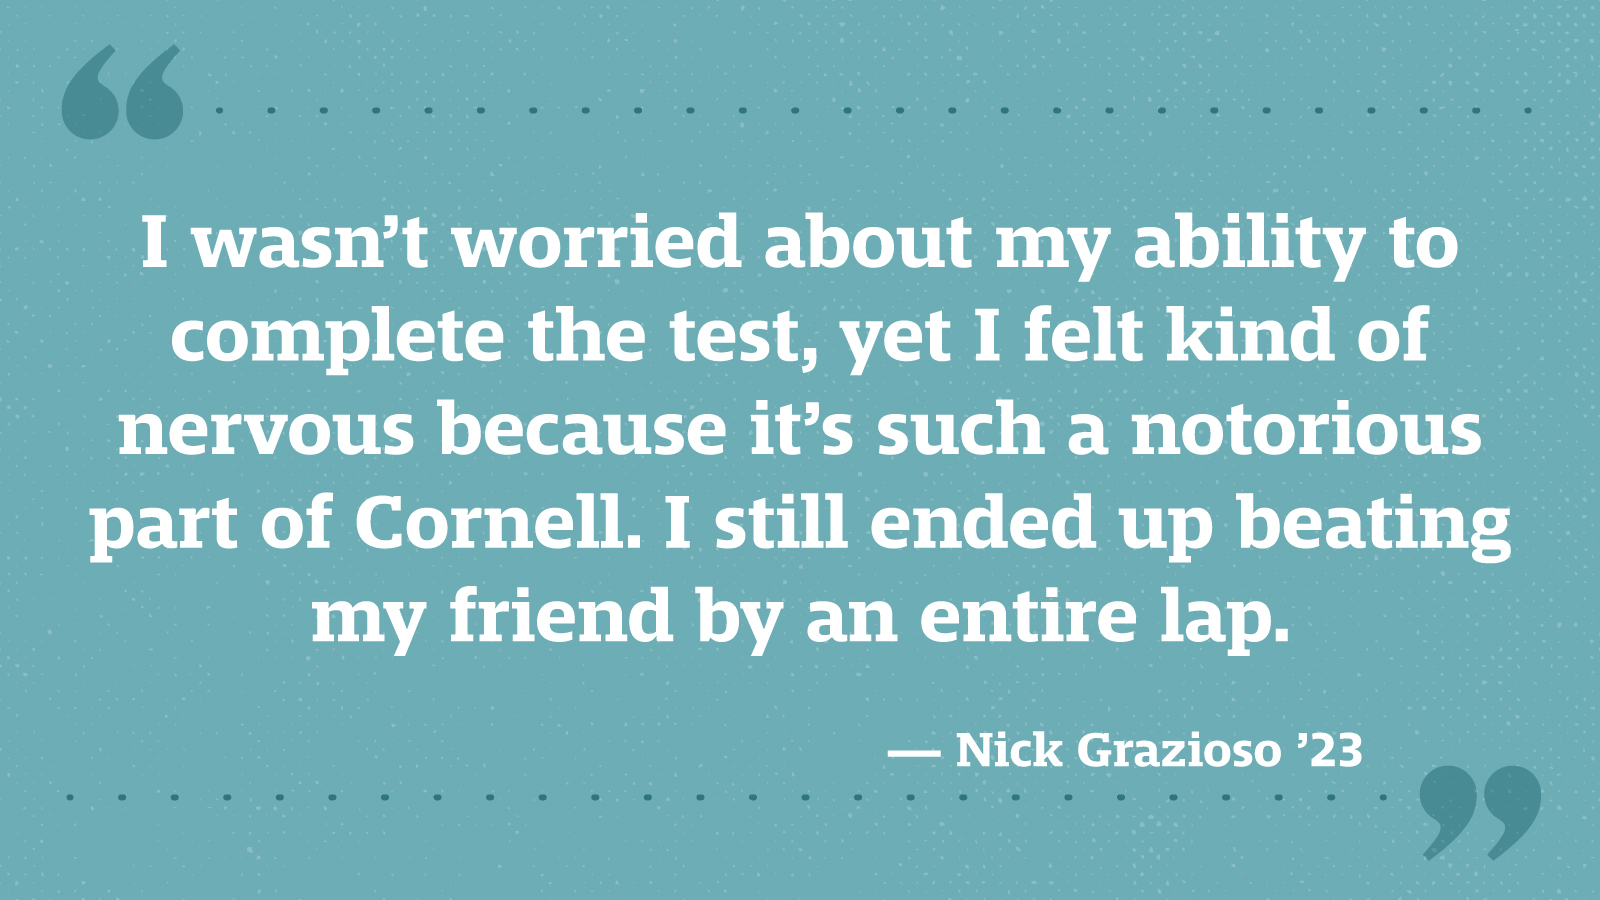 I wasn’t worried about my ability to complete the test, yet I felt kind of nervous because it’s such a notorious part of Cornell. I still ended up beating my friend by an entire lap. — Nick Grazioso ’23